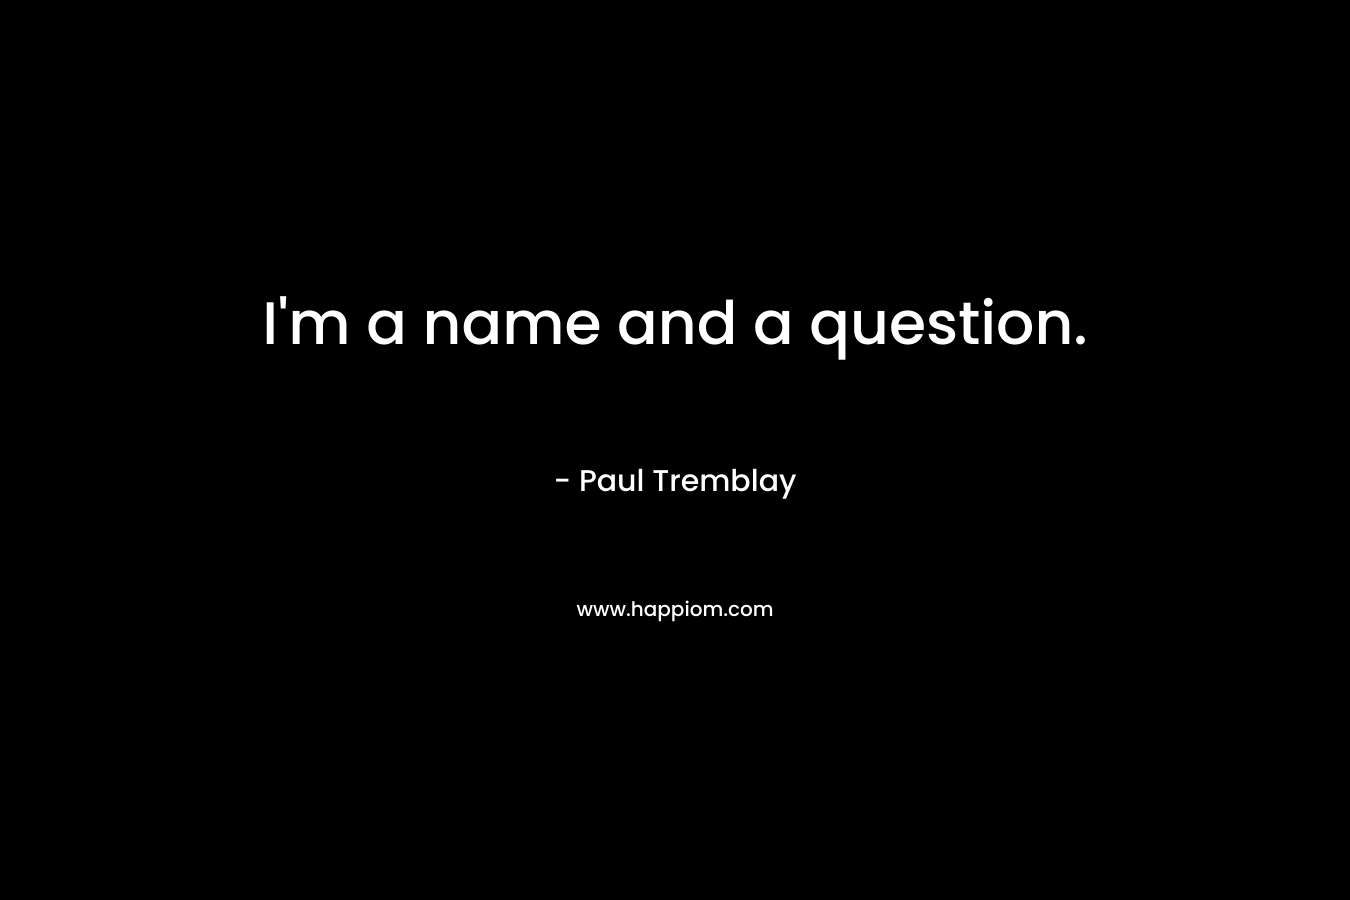 I'm a name and a question.